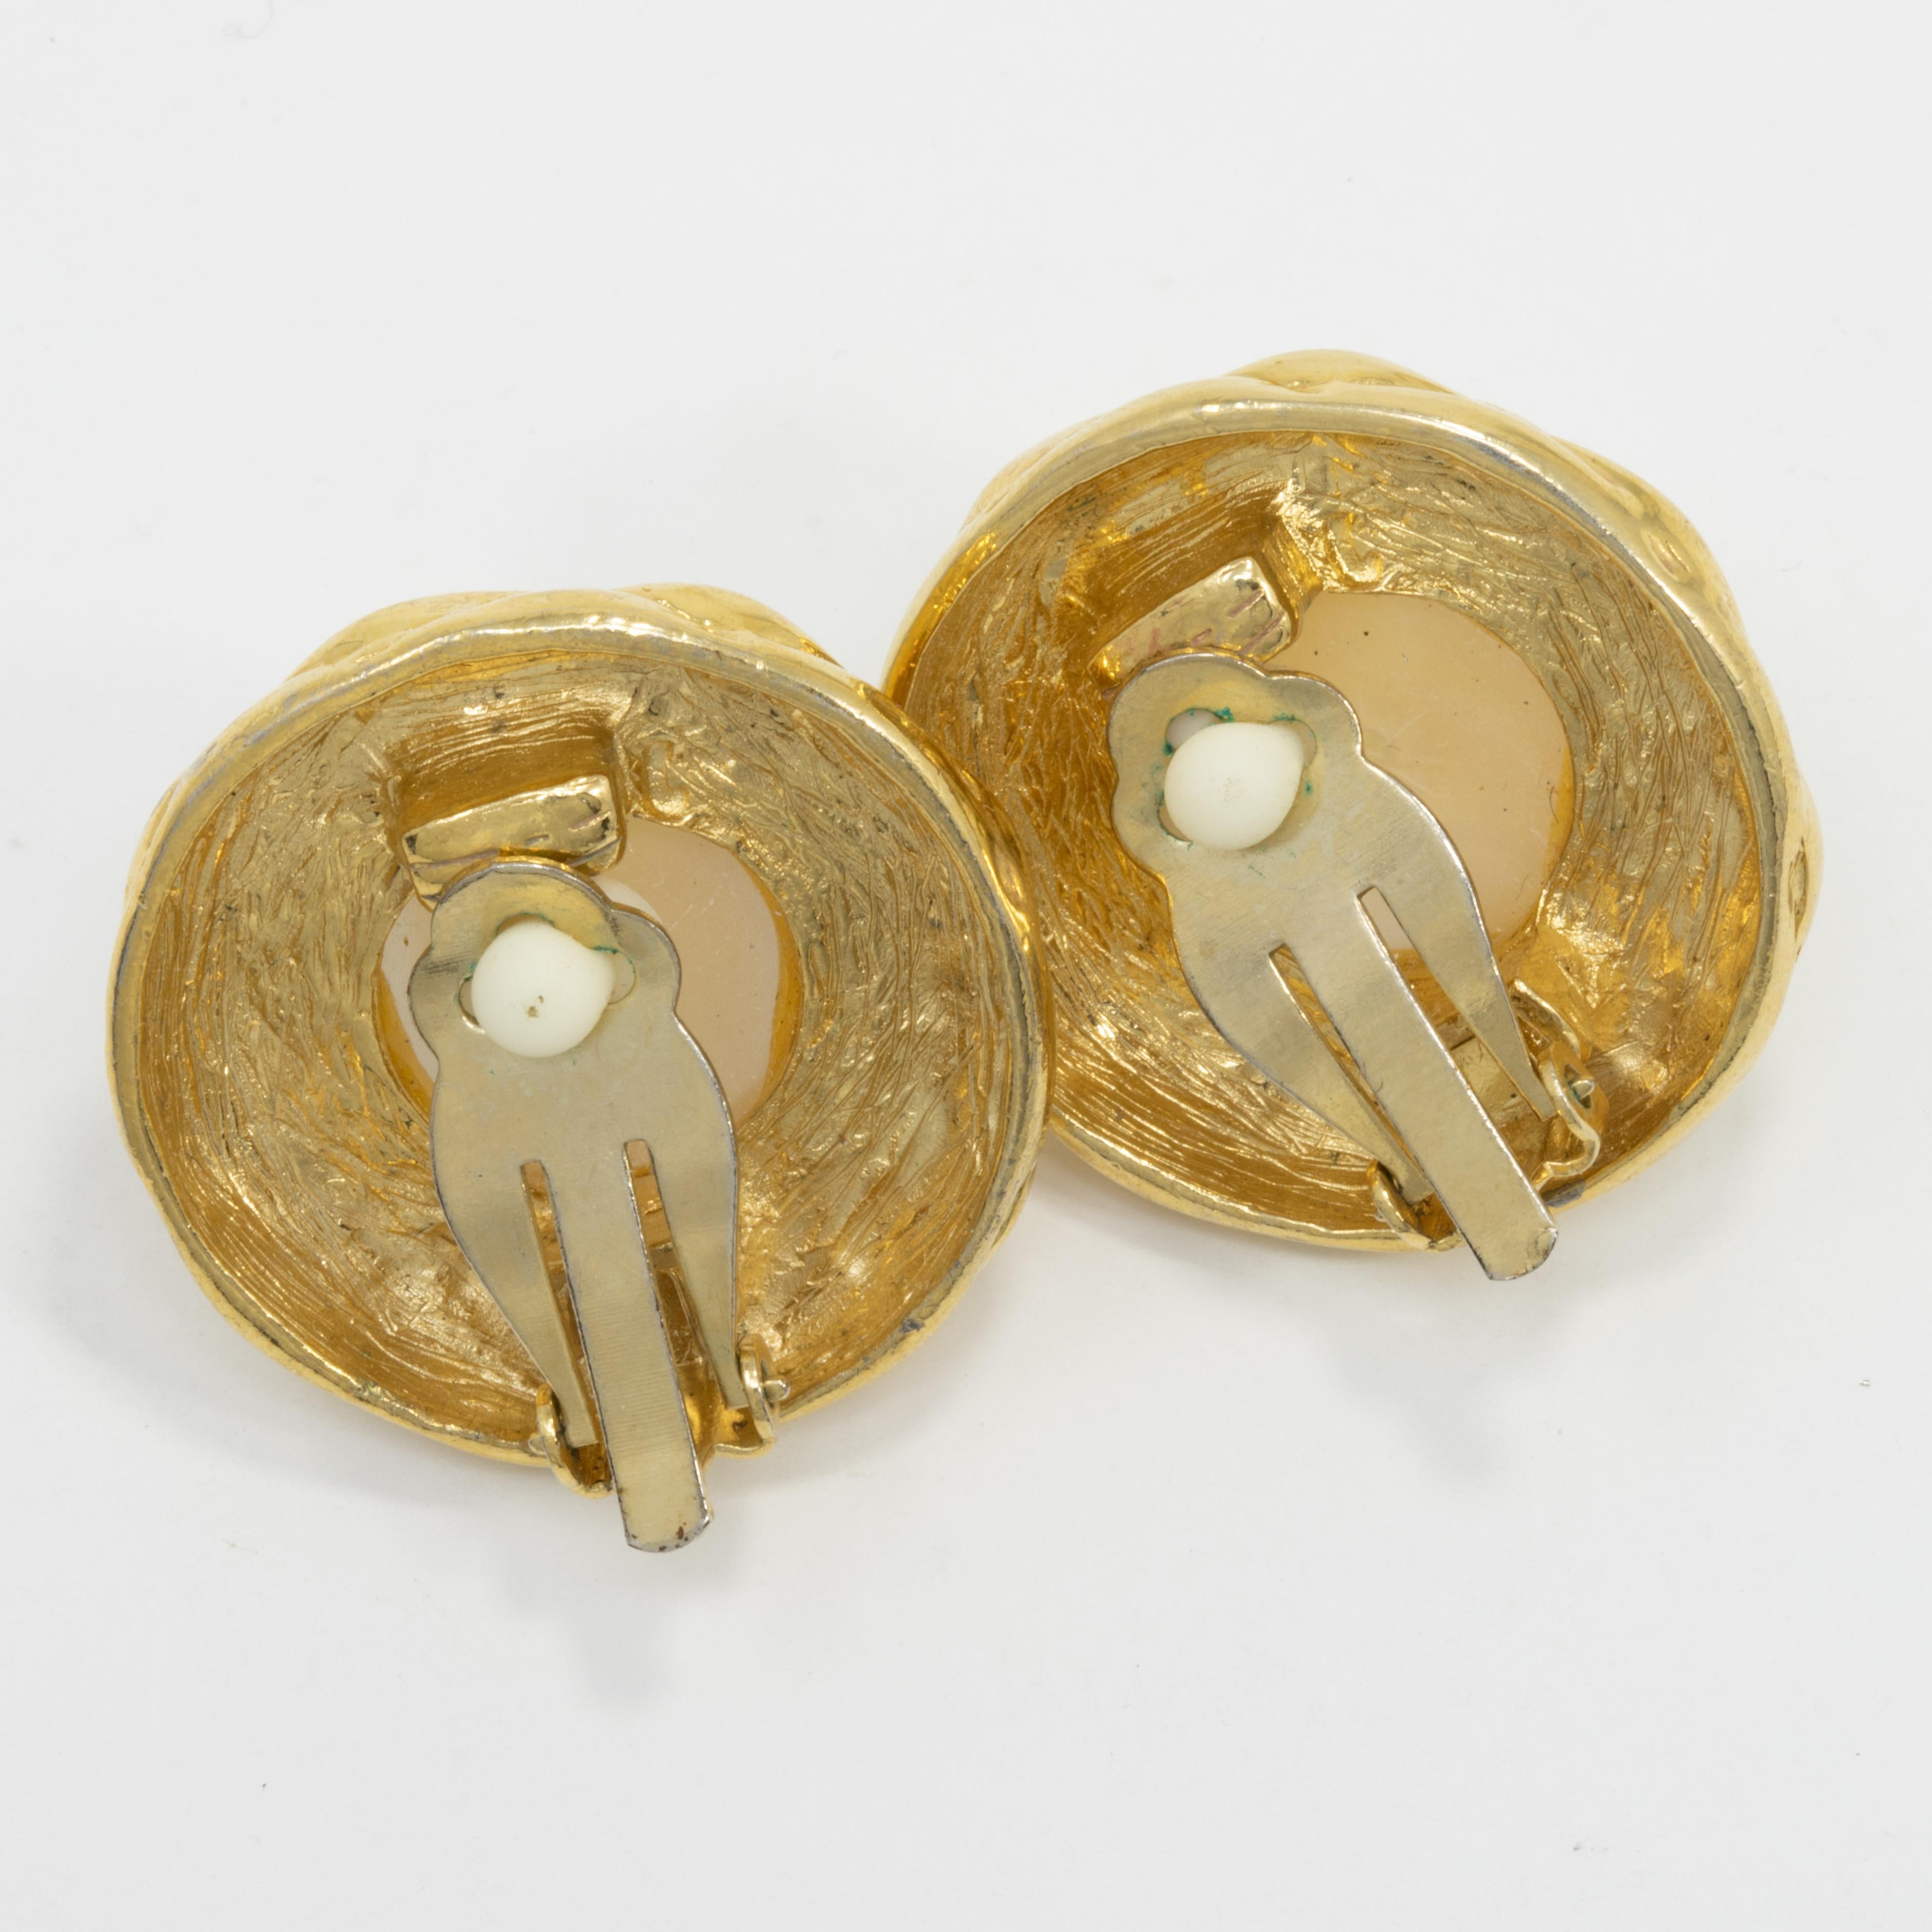 Luxurious earrings with a bold faux pearl centerpiece - a perfect touch of class!

Circa mid to late 1900s.

Gold-tone.
